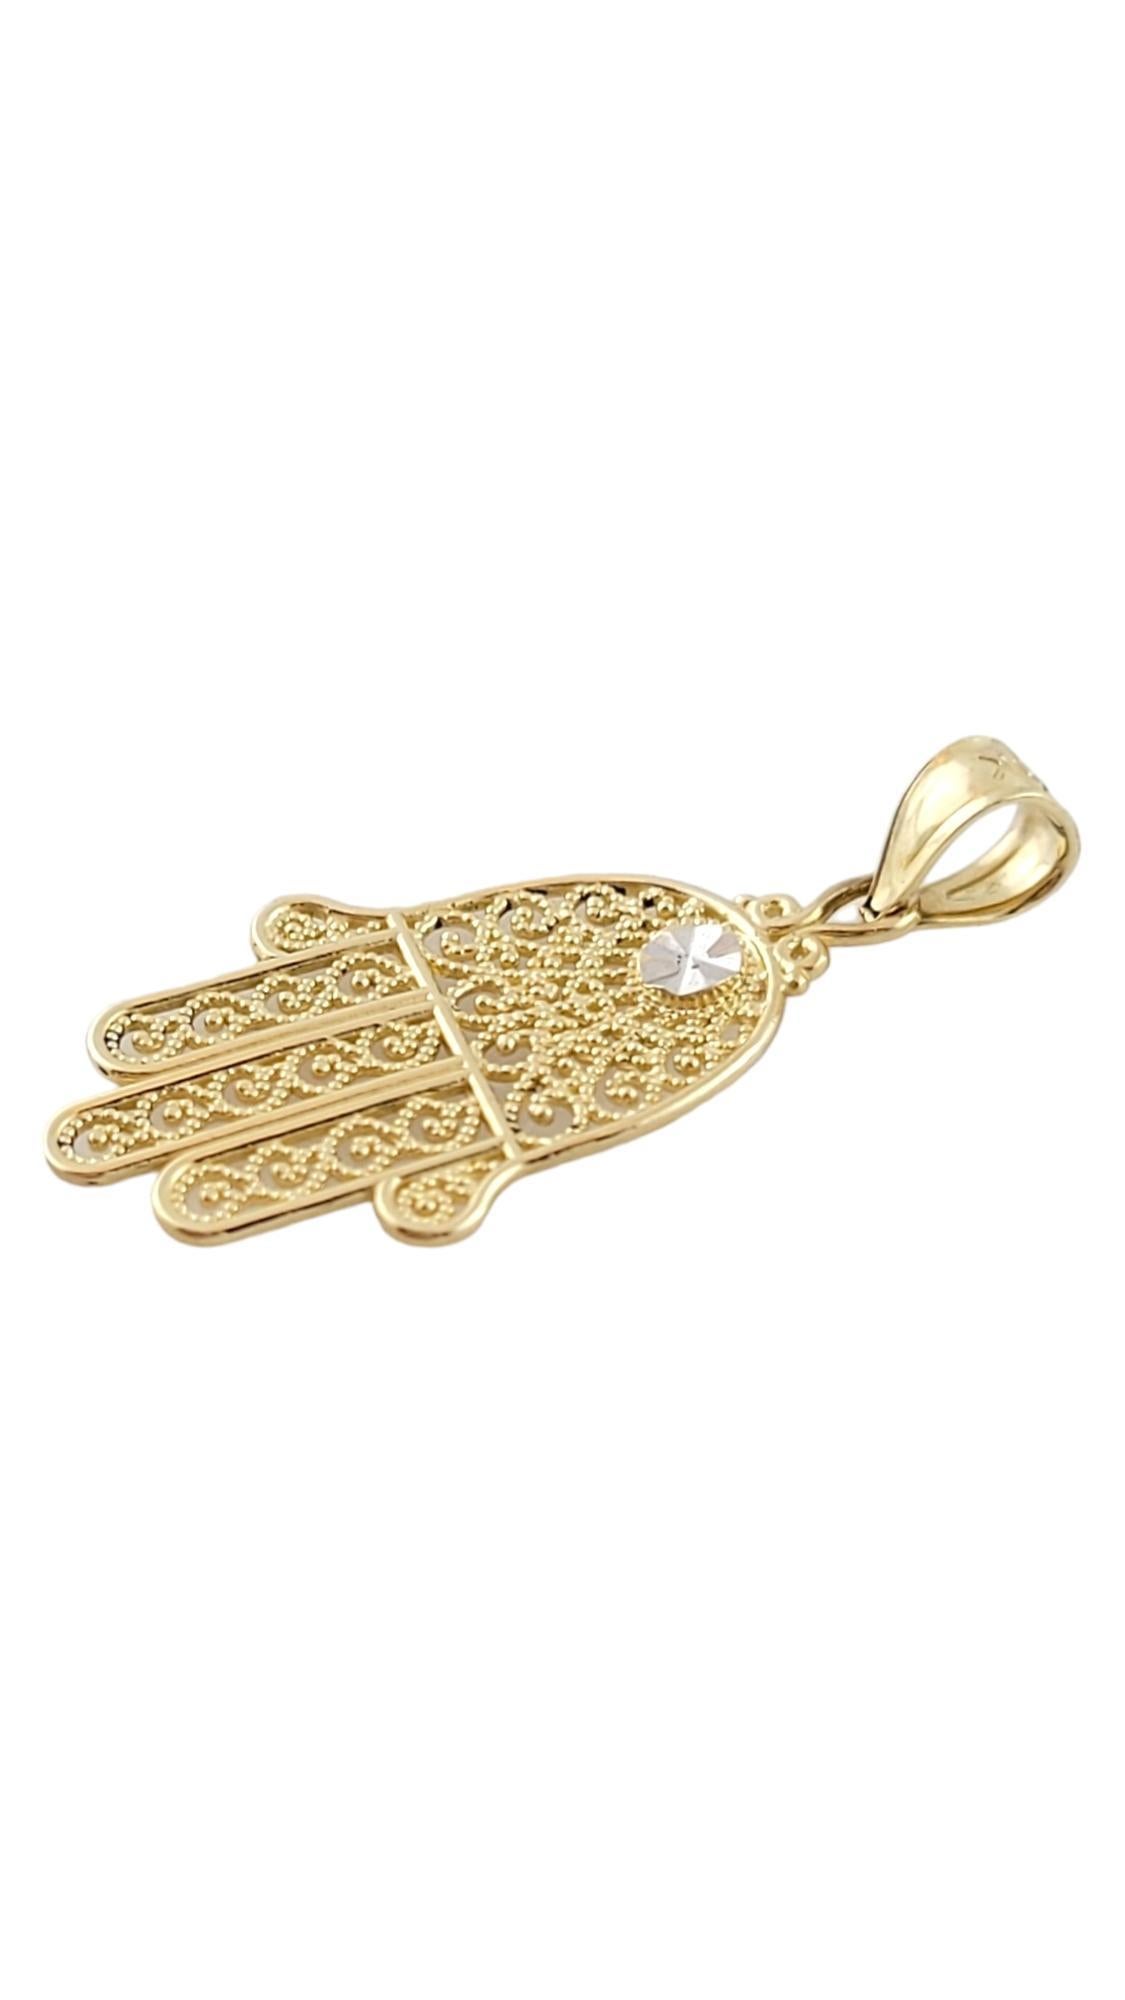 Vintage 10K Yellow and White Gold Hamsa Hand Pendant

This gorgeous Hamsa hand pendant is crafted with amazing detailing from 10K yellow gold with white gold details!

Size: 23.3mm X 12.9mm x 0.72mm
Length with bail: 27.56mm

Weight: 0.5 dwt/ 0.7